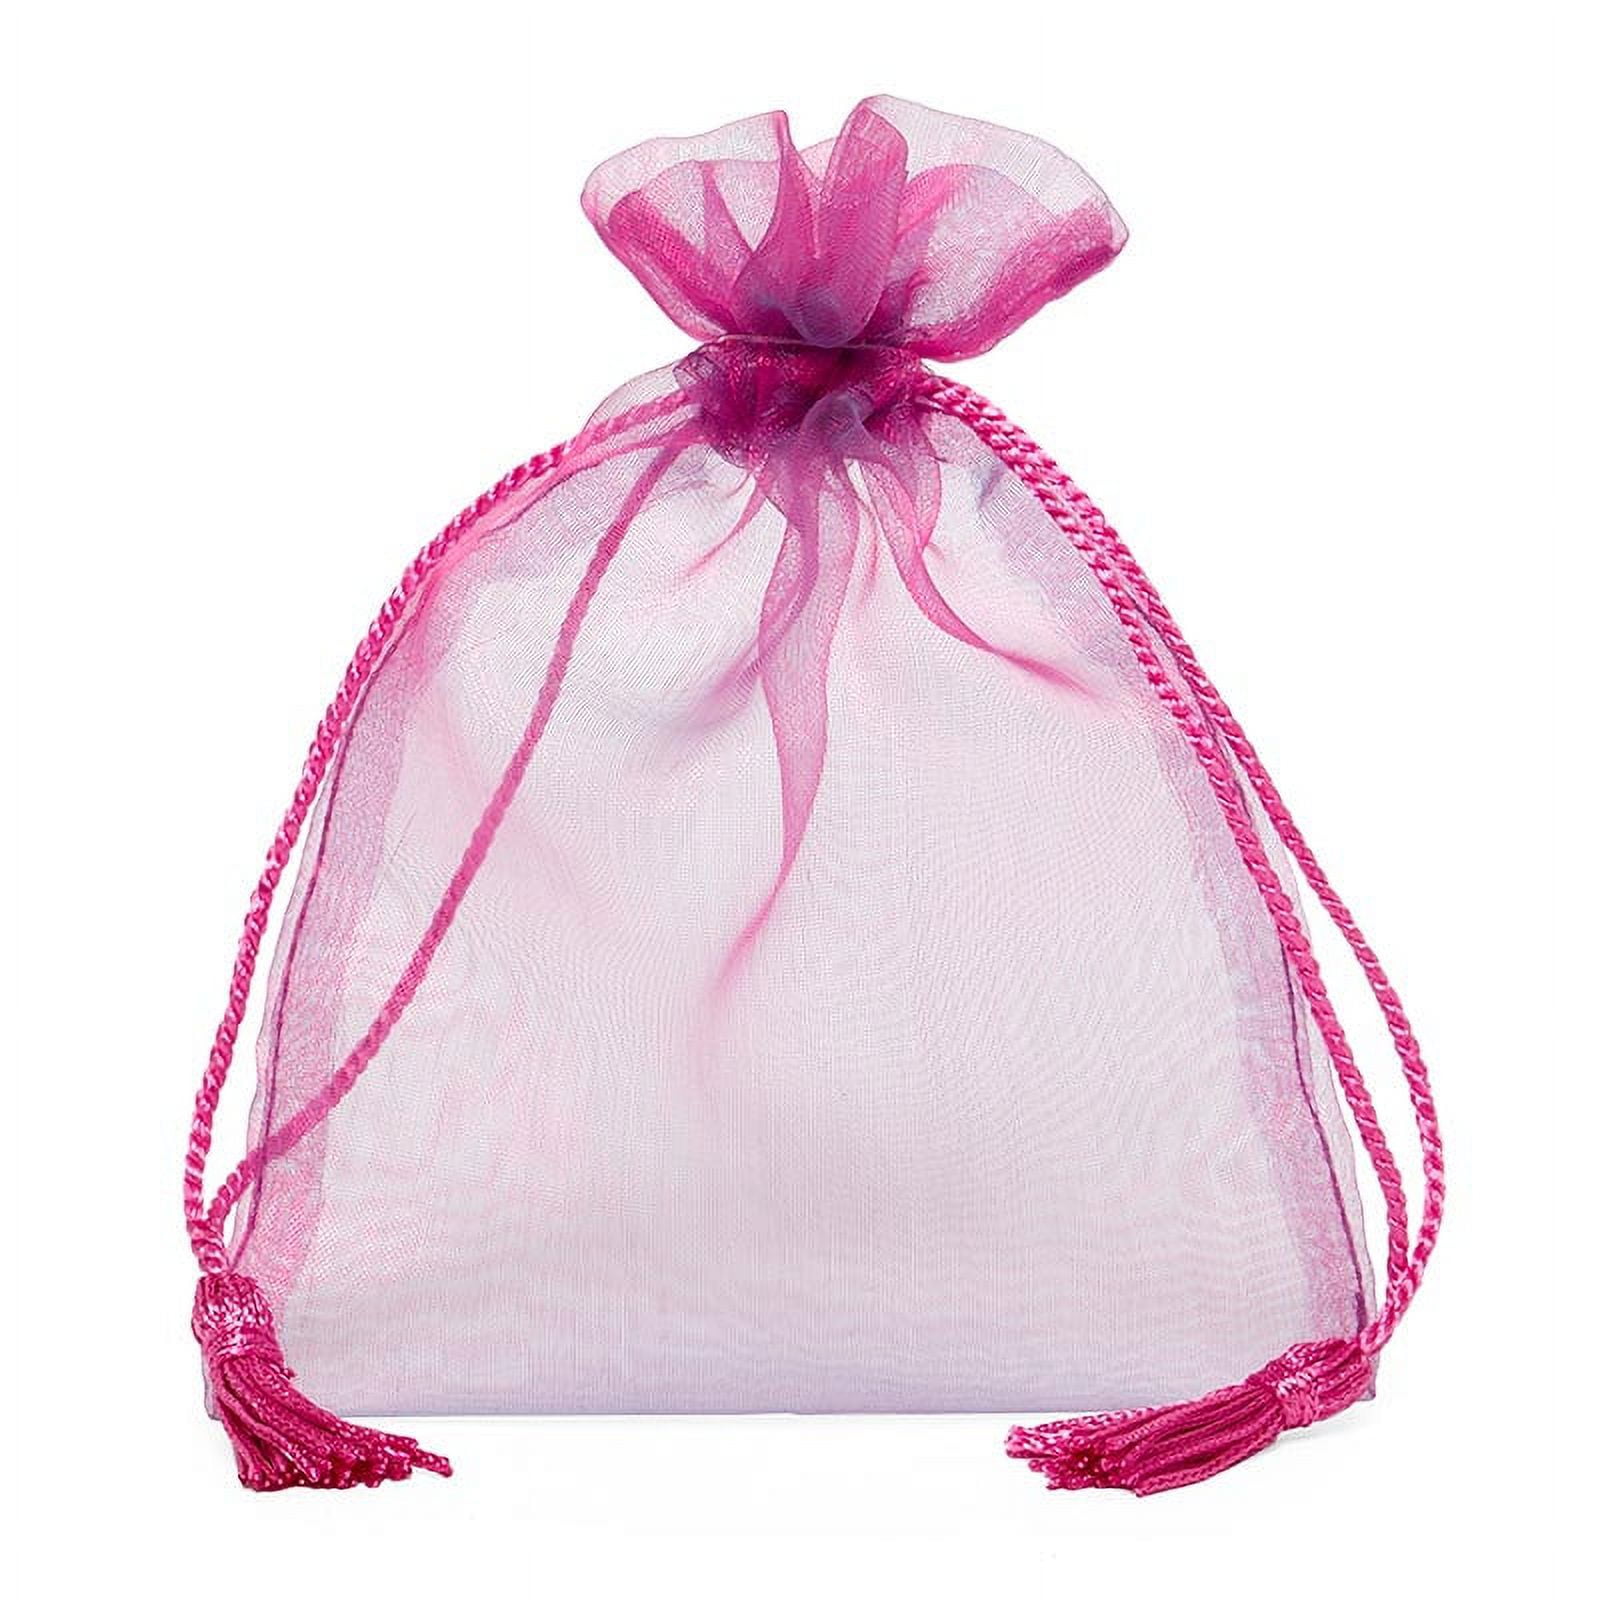 HRX Package 100pcs Little Organza Bags 3 x 4 inch, Purple Mesh Bags Drawstring Pouches for Jewelry Bracelets Candy Party Favor Small Gift